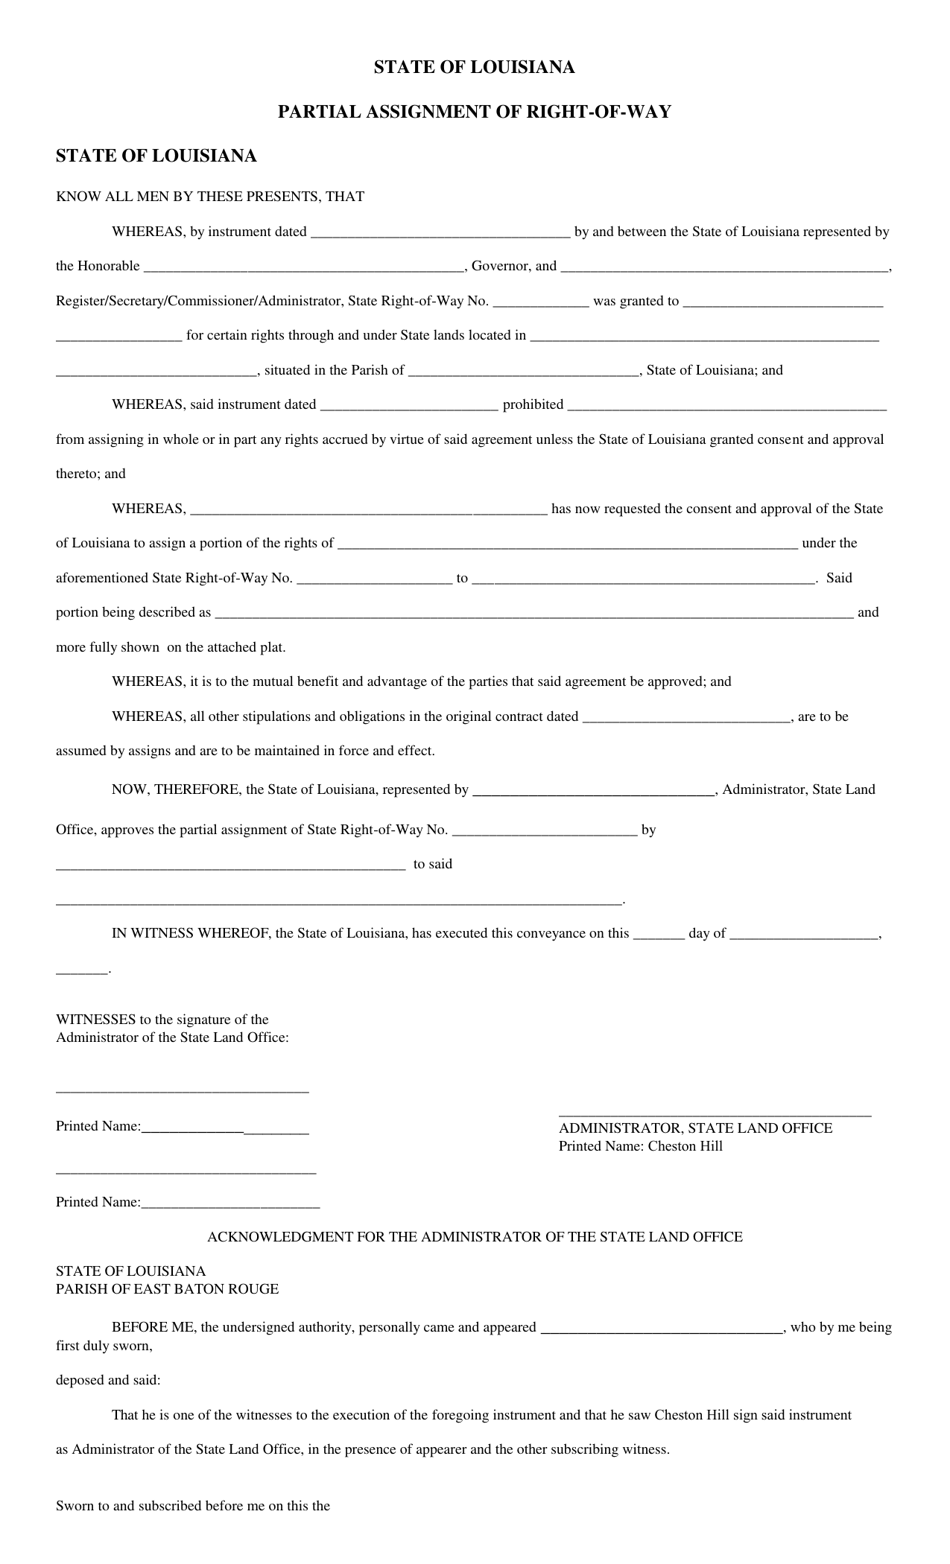 Partial Assignment of Right-Of-Way - Louisiana, Page 1